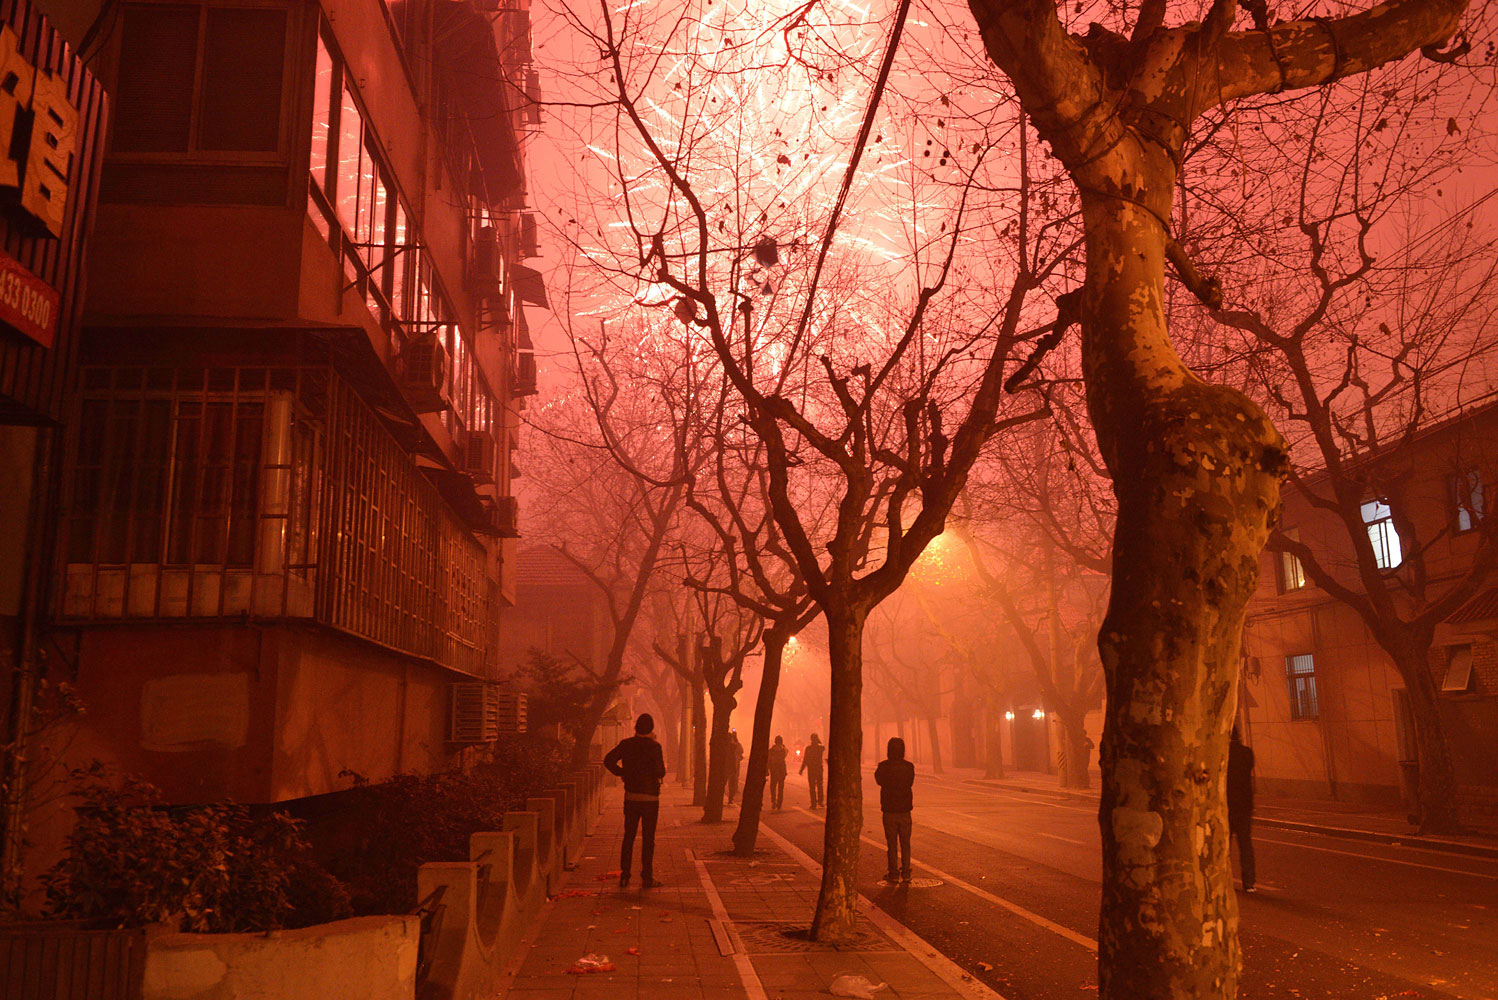 Fireworks explode in a street of Shanghai on the eve of Chinese New Year on Jan. 30, 2014.